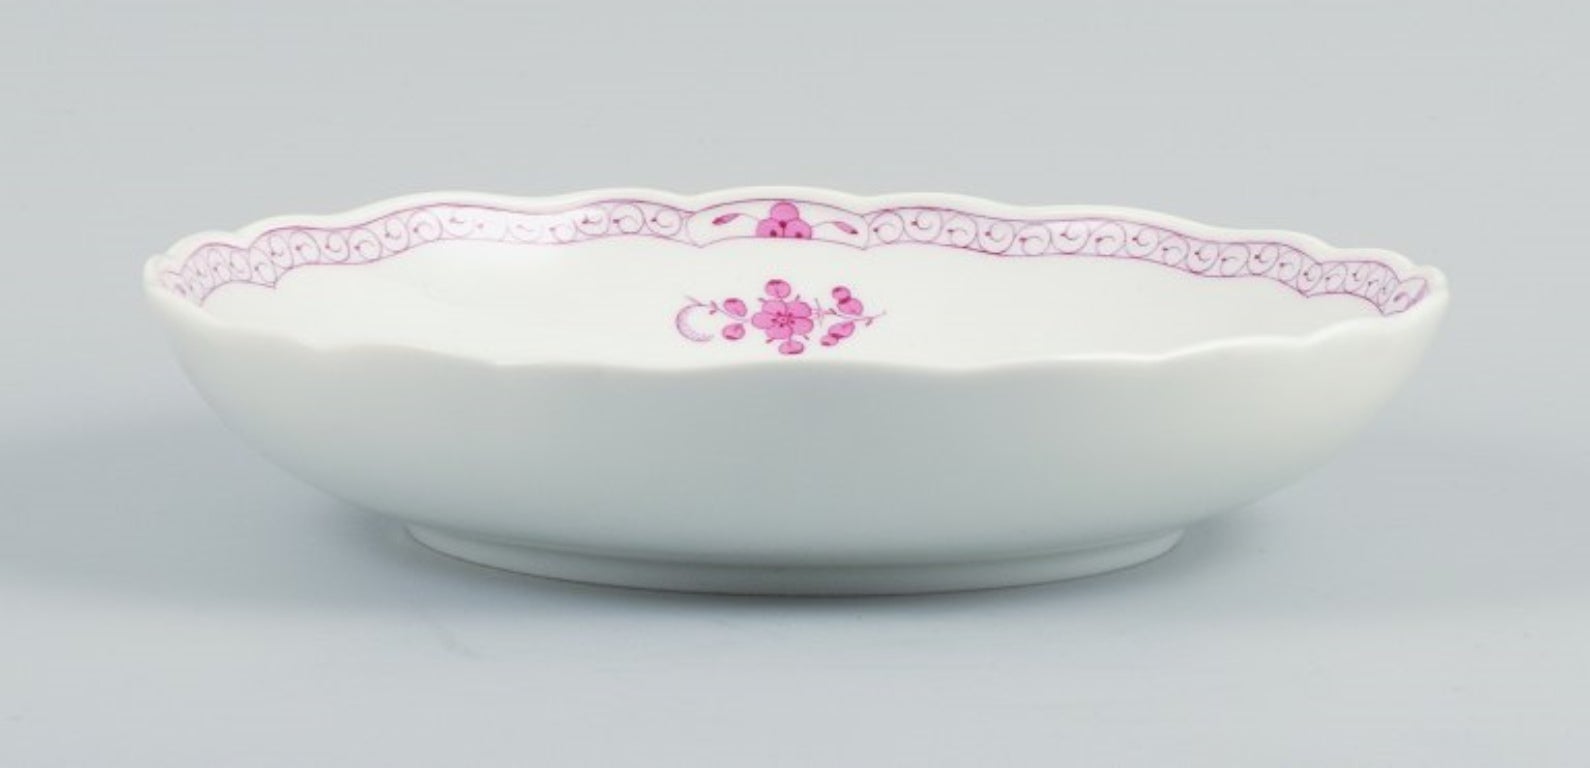 Meissen, Germany, Pink Indian, large round bowl.
Hand-painted in high quality.
Approx. 1900.
Marked.
Third factory quality.
In good condition with no signs of use.
Dimensions: D 25.0 x H 5.0 cm.